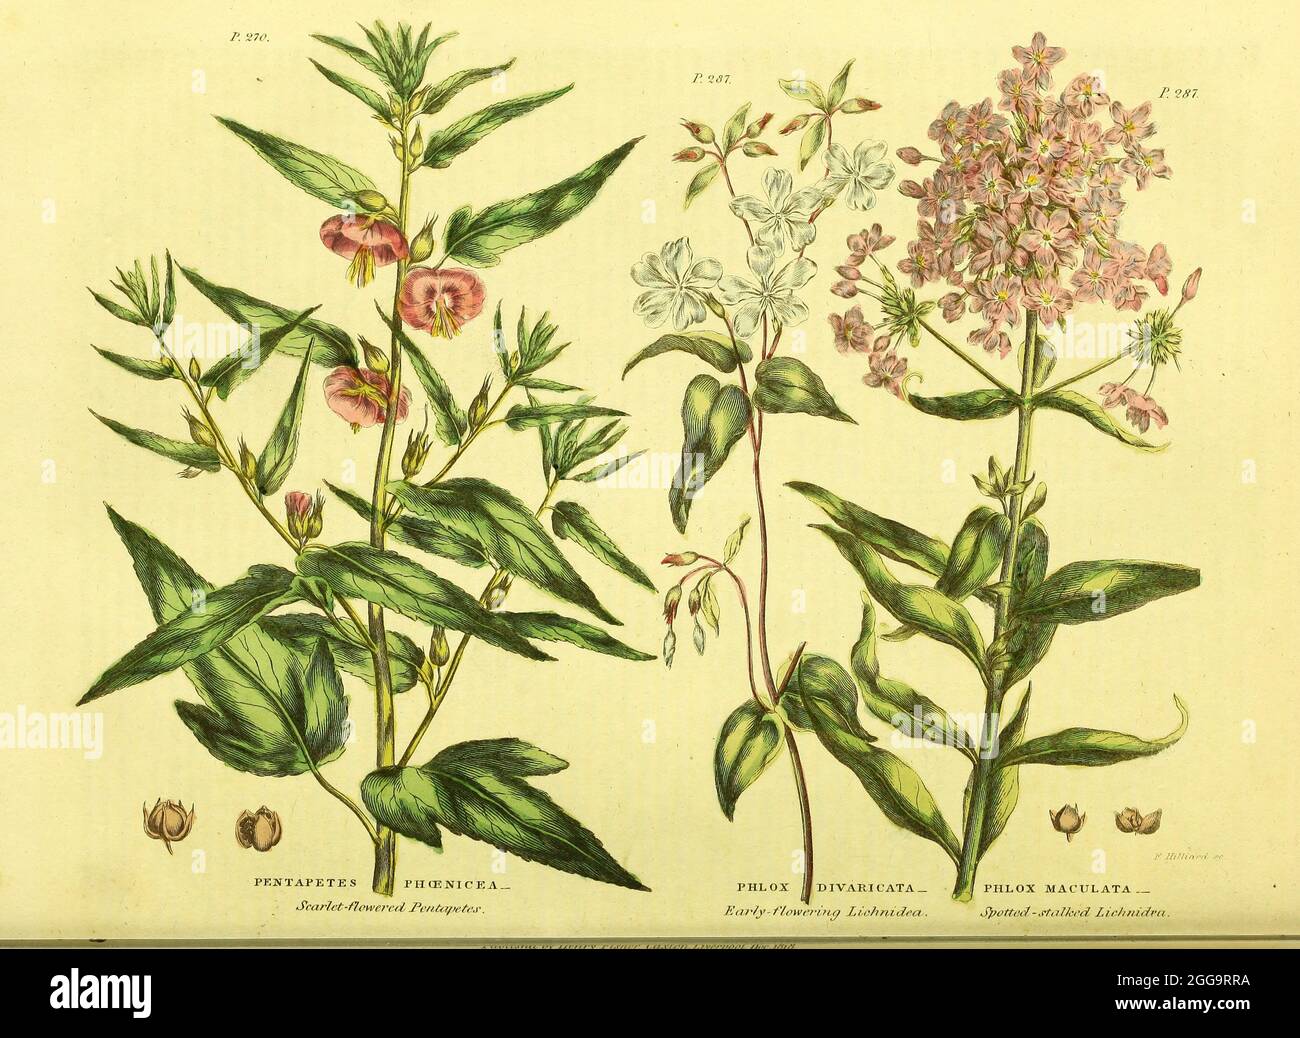 Pentapetes phoenicea [Scarlet flowered Pentapetes] Phlox divaricata [Early flowring Lichnidea] and Phlox maculata Spotted-stalked Lichnidea] from Vol II of the book The universal herbal : or botanical, medical and agricultural dictionary : containing an account of all known plants in the world, arranged according to the Linnean system. Specifying the uses to which they are or may be applied By Thomas Green,  Published in 1816 by Nuttall, Fisher & Co. in Liverpool and Printed at the Caxton Press by H. Fisher Stock Photo